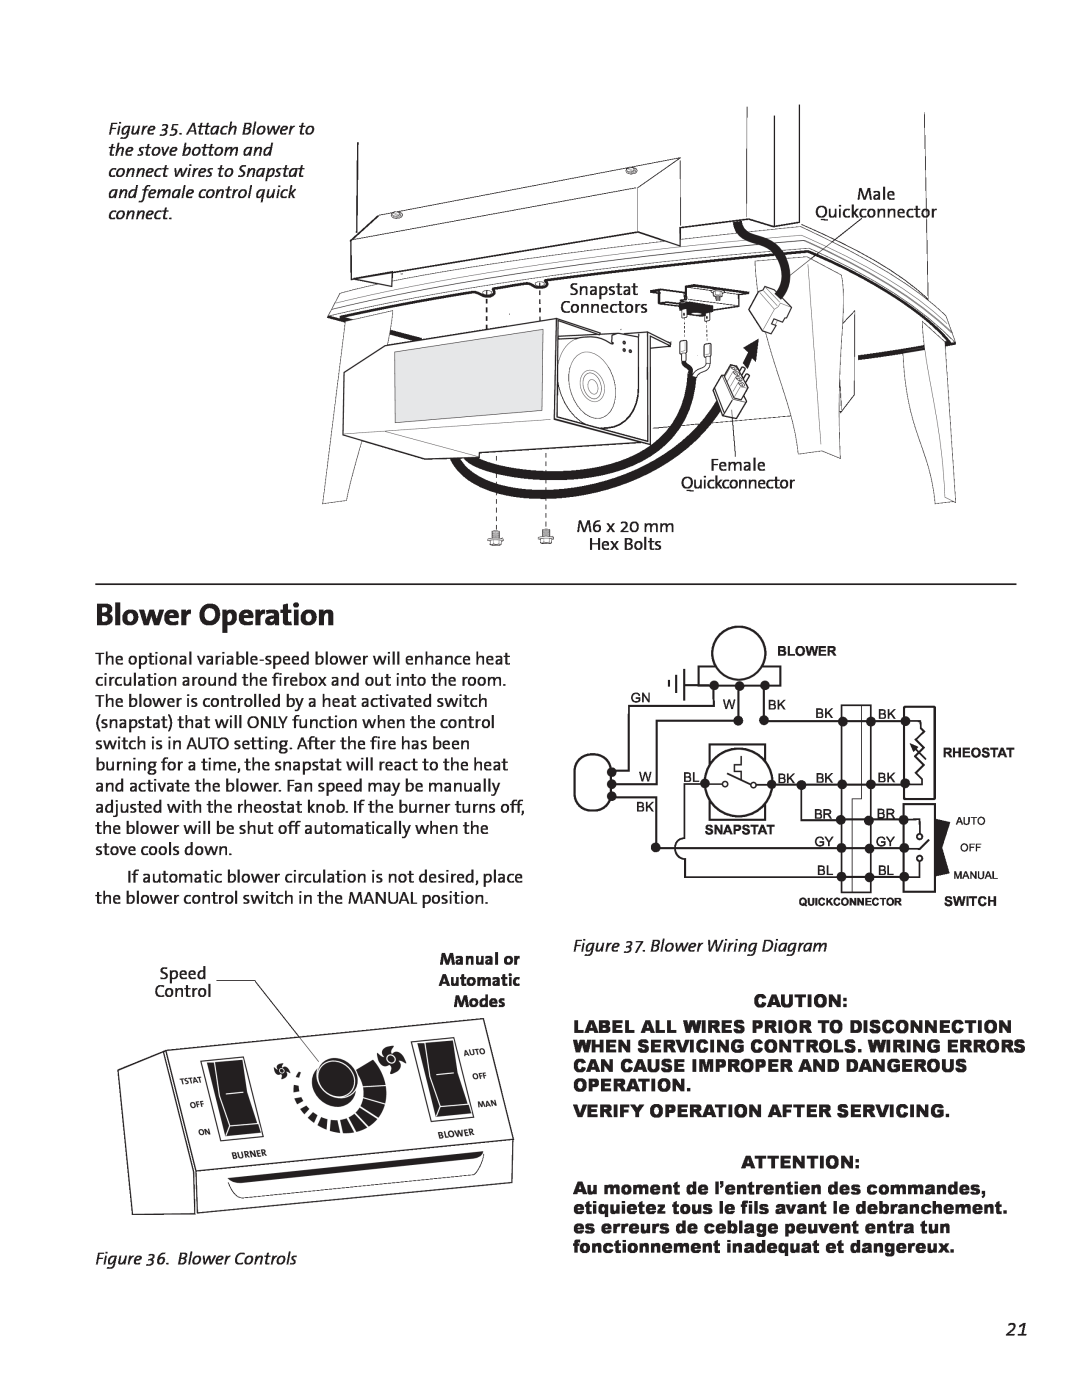 Jotul GF300 BV manual Blower Operation, Speed, Blower Controls, Blower Wiring Diagram, Verify Operation After Servicing 